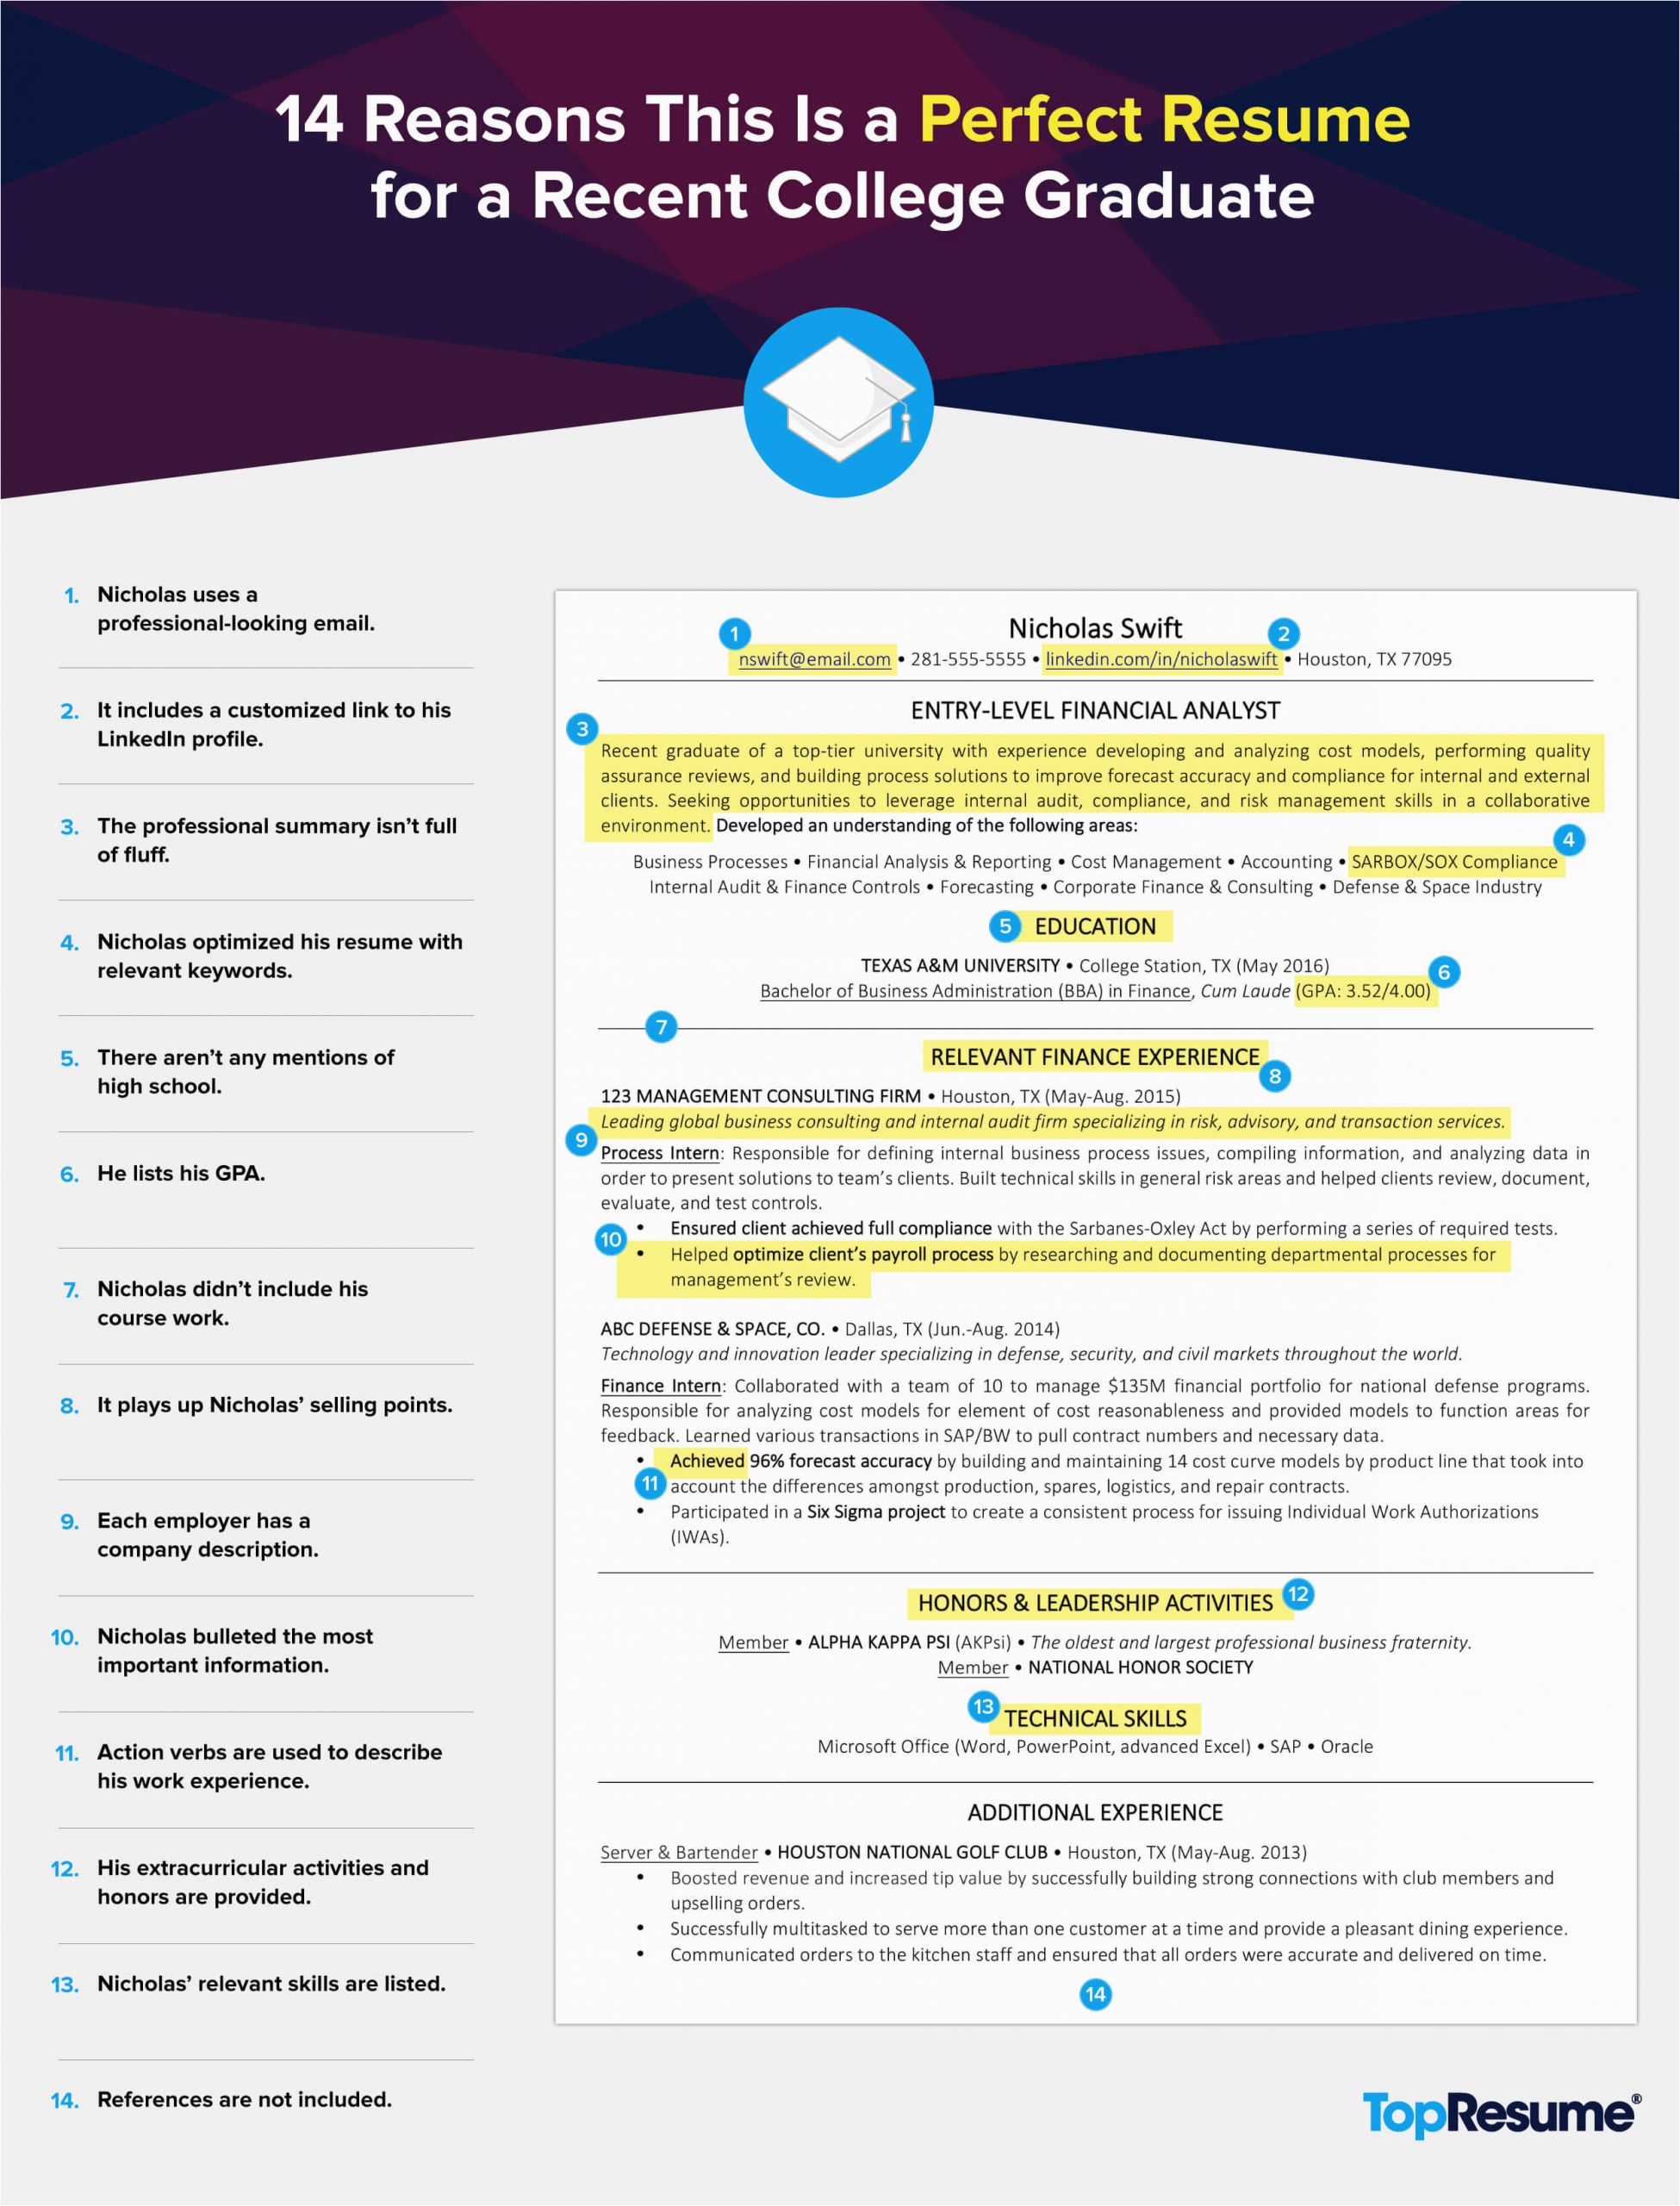 Best Resume Template for Recent College Graduate 14 Reasons This is A Perfect Recent College Graduate